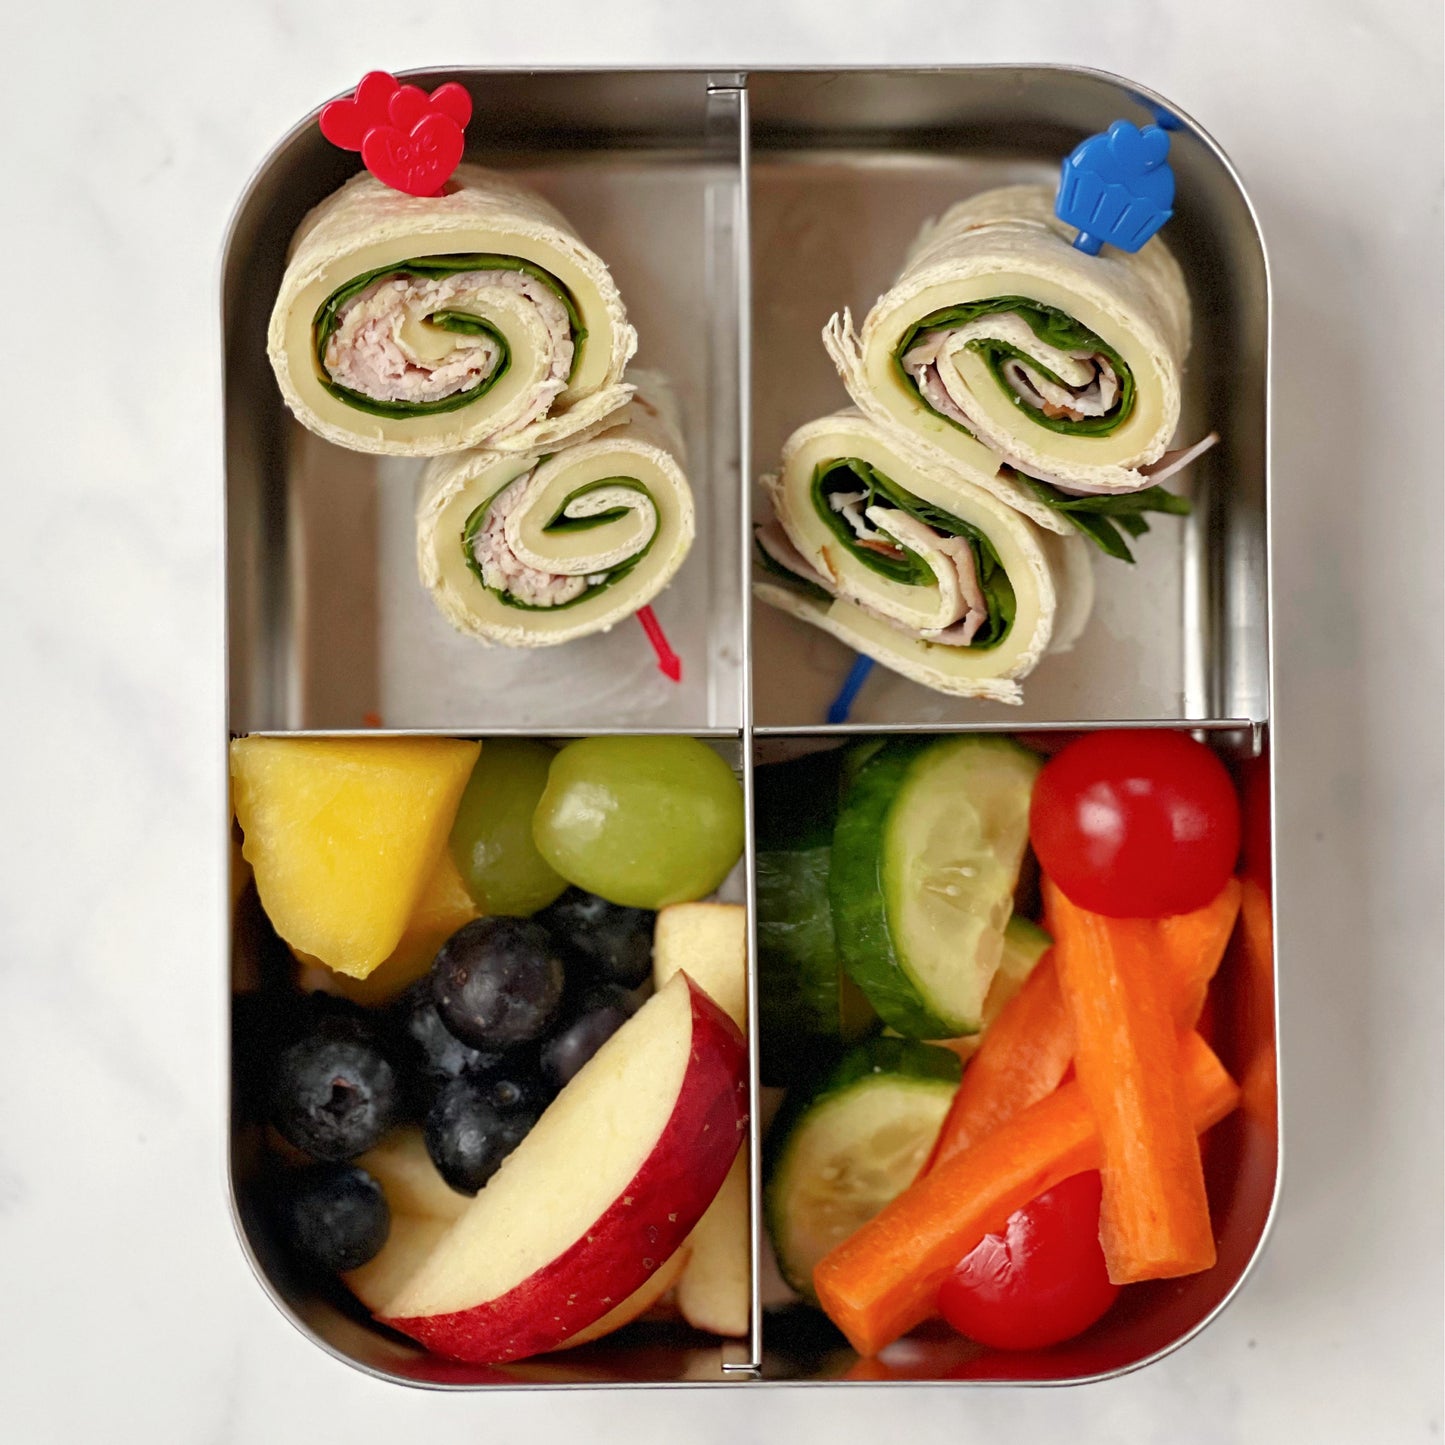 A red and blue Pick Stick with a filled wrap on each skewer in a four comparment metal lunchbox and a serving of fresh fruit and vegetables.